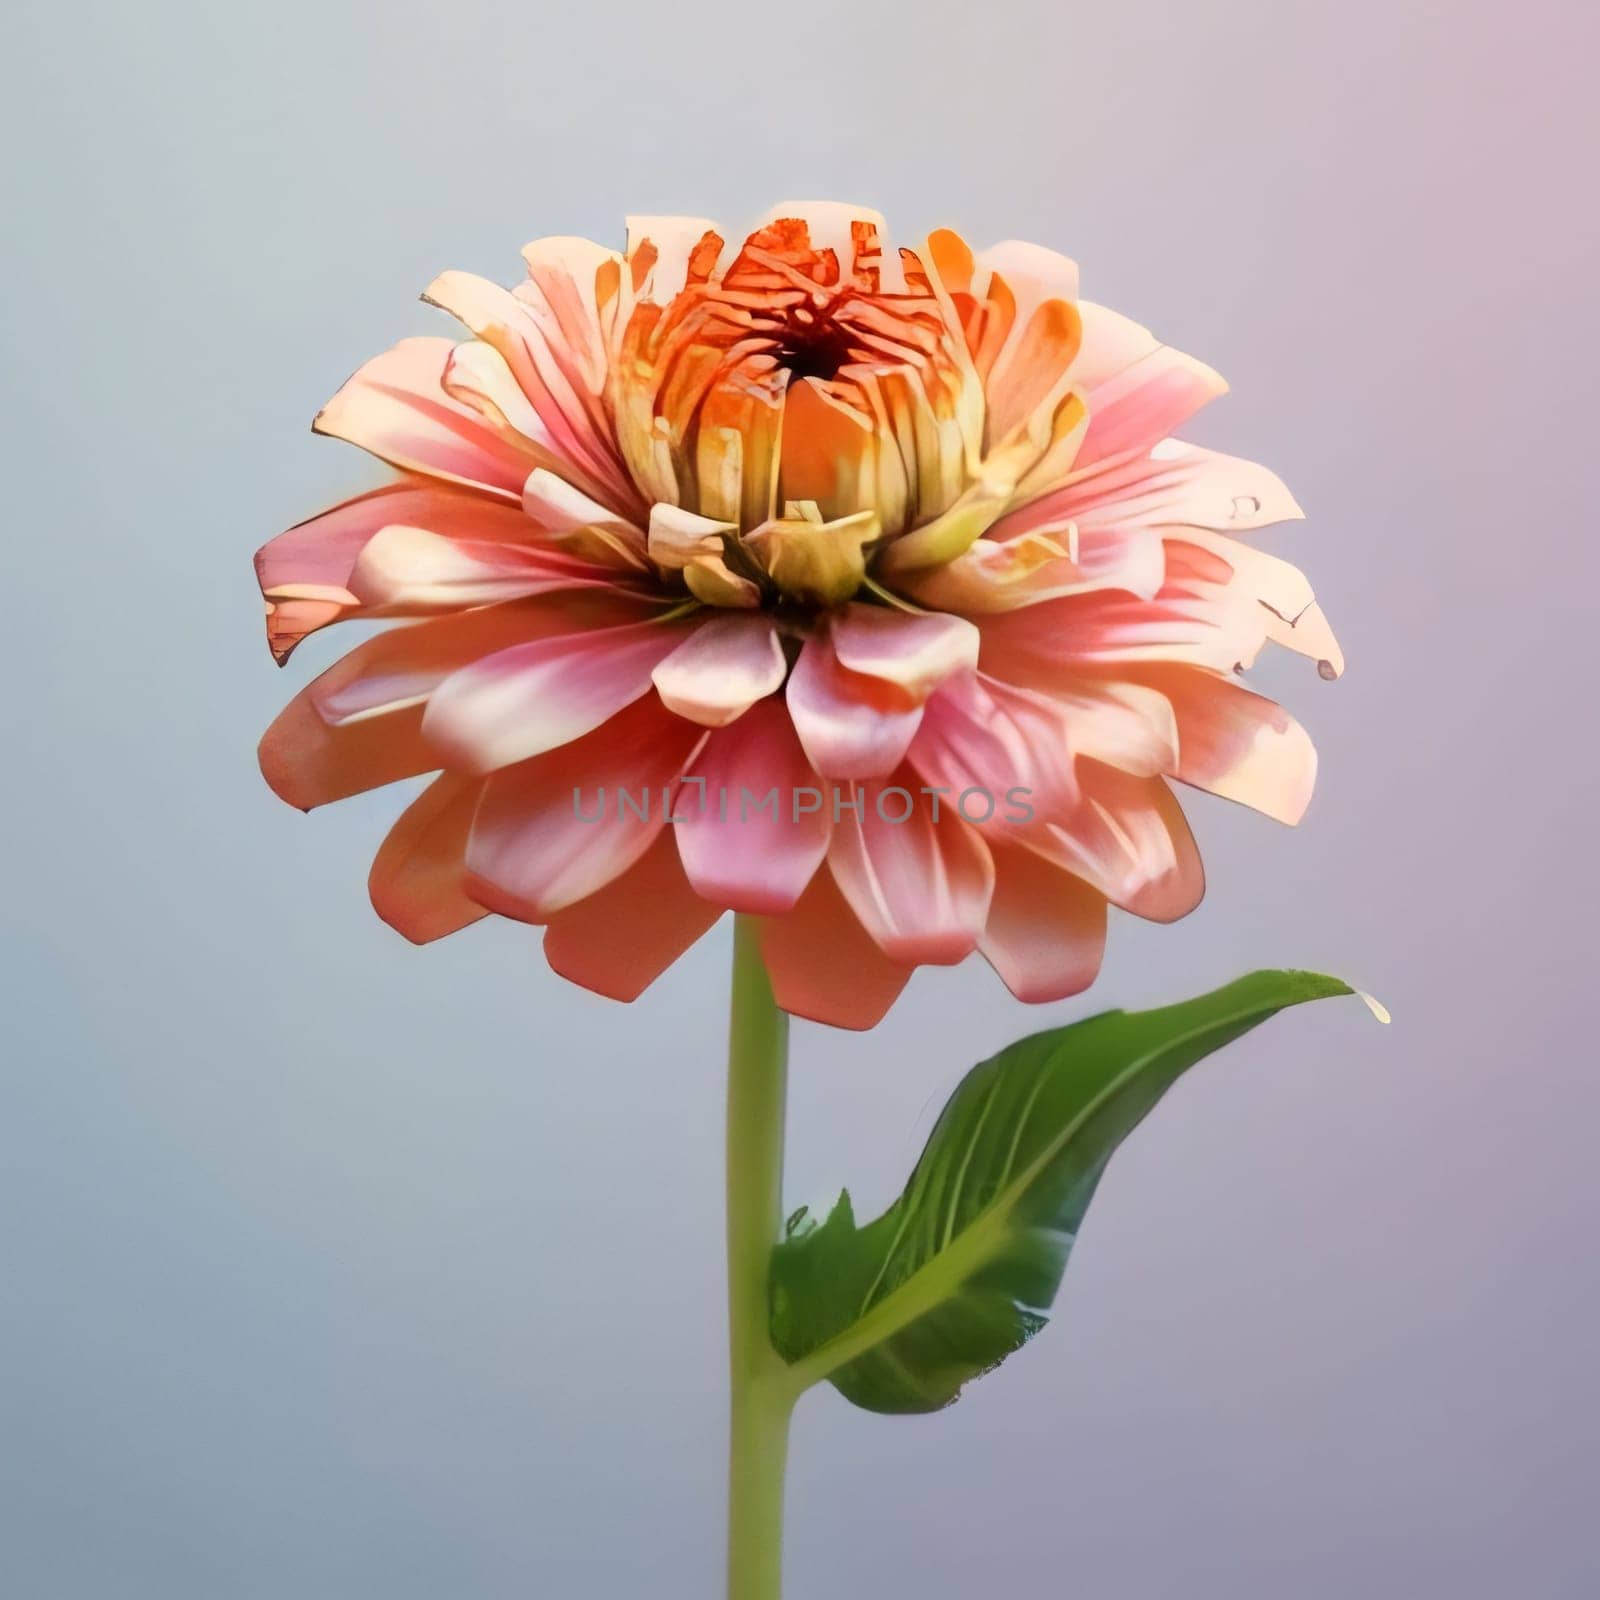 Pink gerber daisy on gray isolated background. Flowering flowers, a symbol of spring, new life. A joyful time of nature waking up to life.